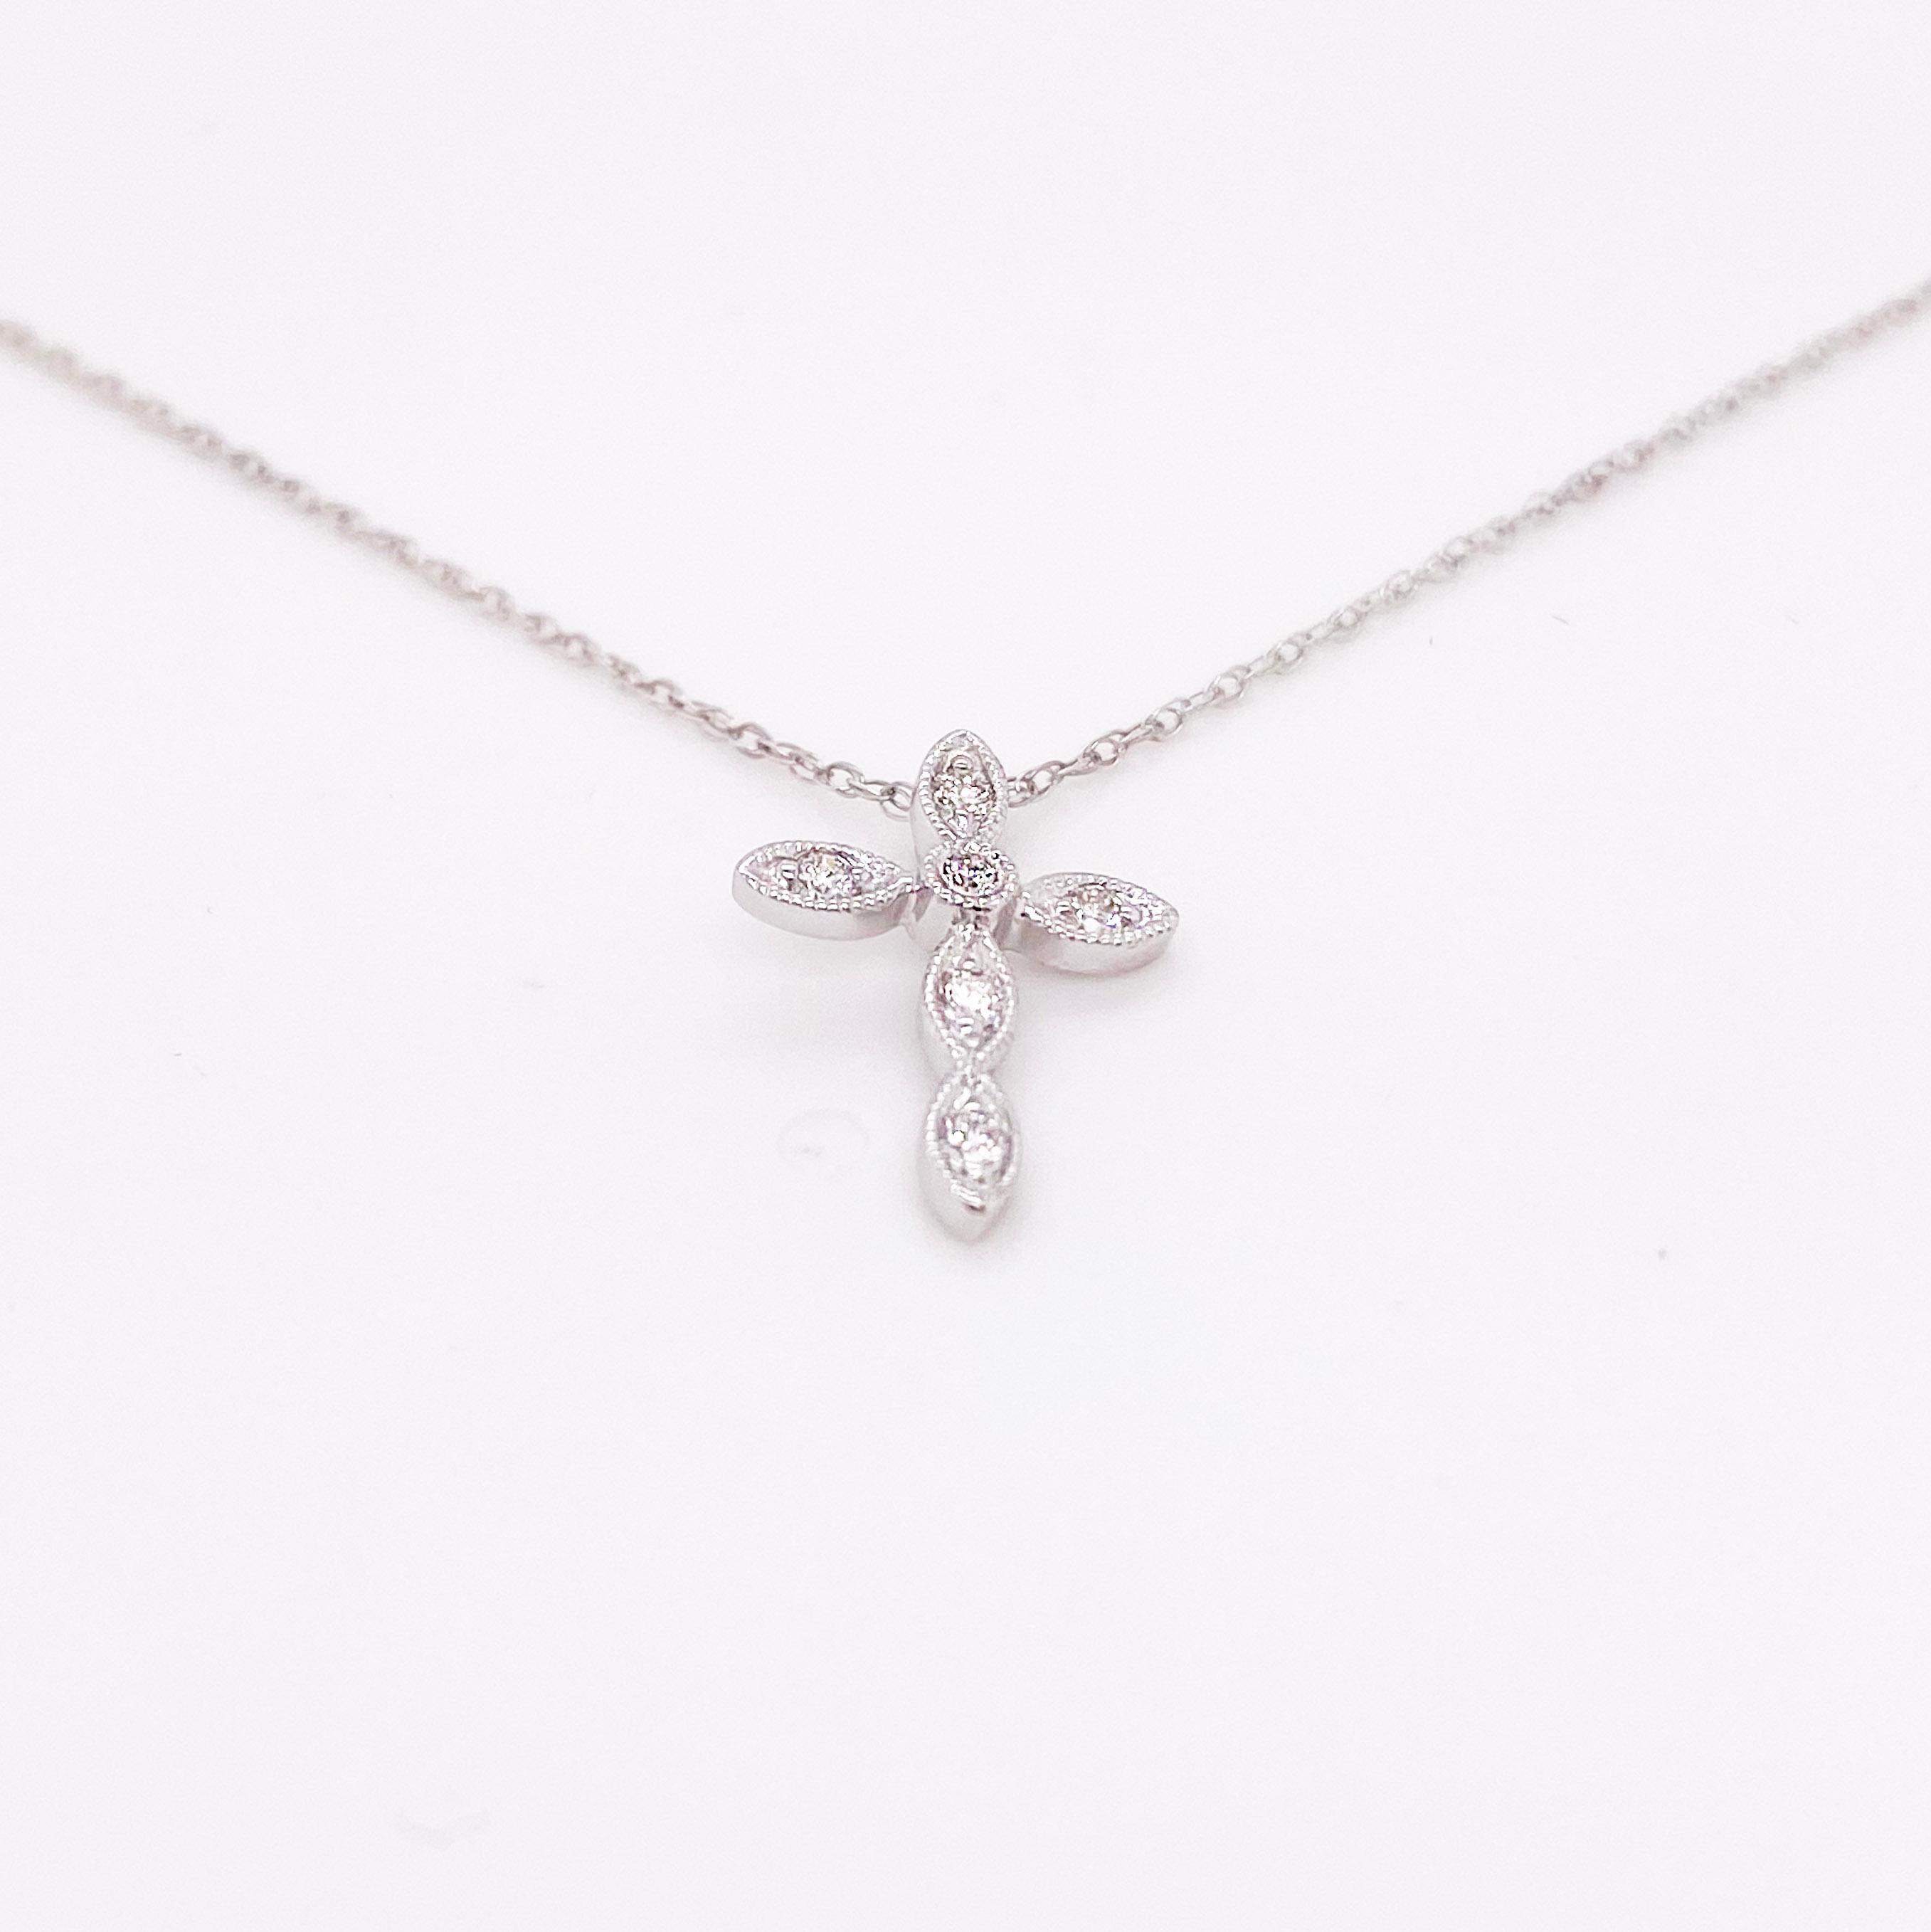 This delicate diamond cross is the perfect size for an everyday fine jewelry piece. This would make a great gift for an Anniversary, Birthday, Christmas or a 1st Communion. The cross is a great size to be worn by itself or paired with other fine